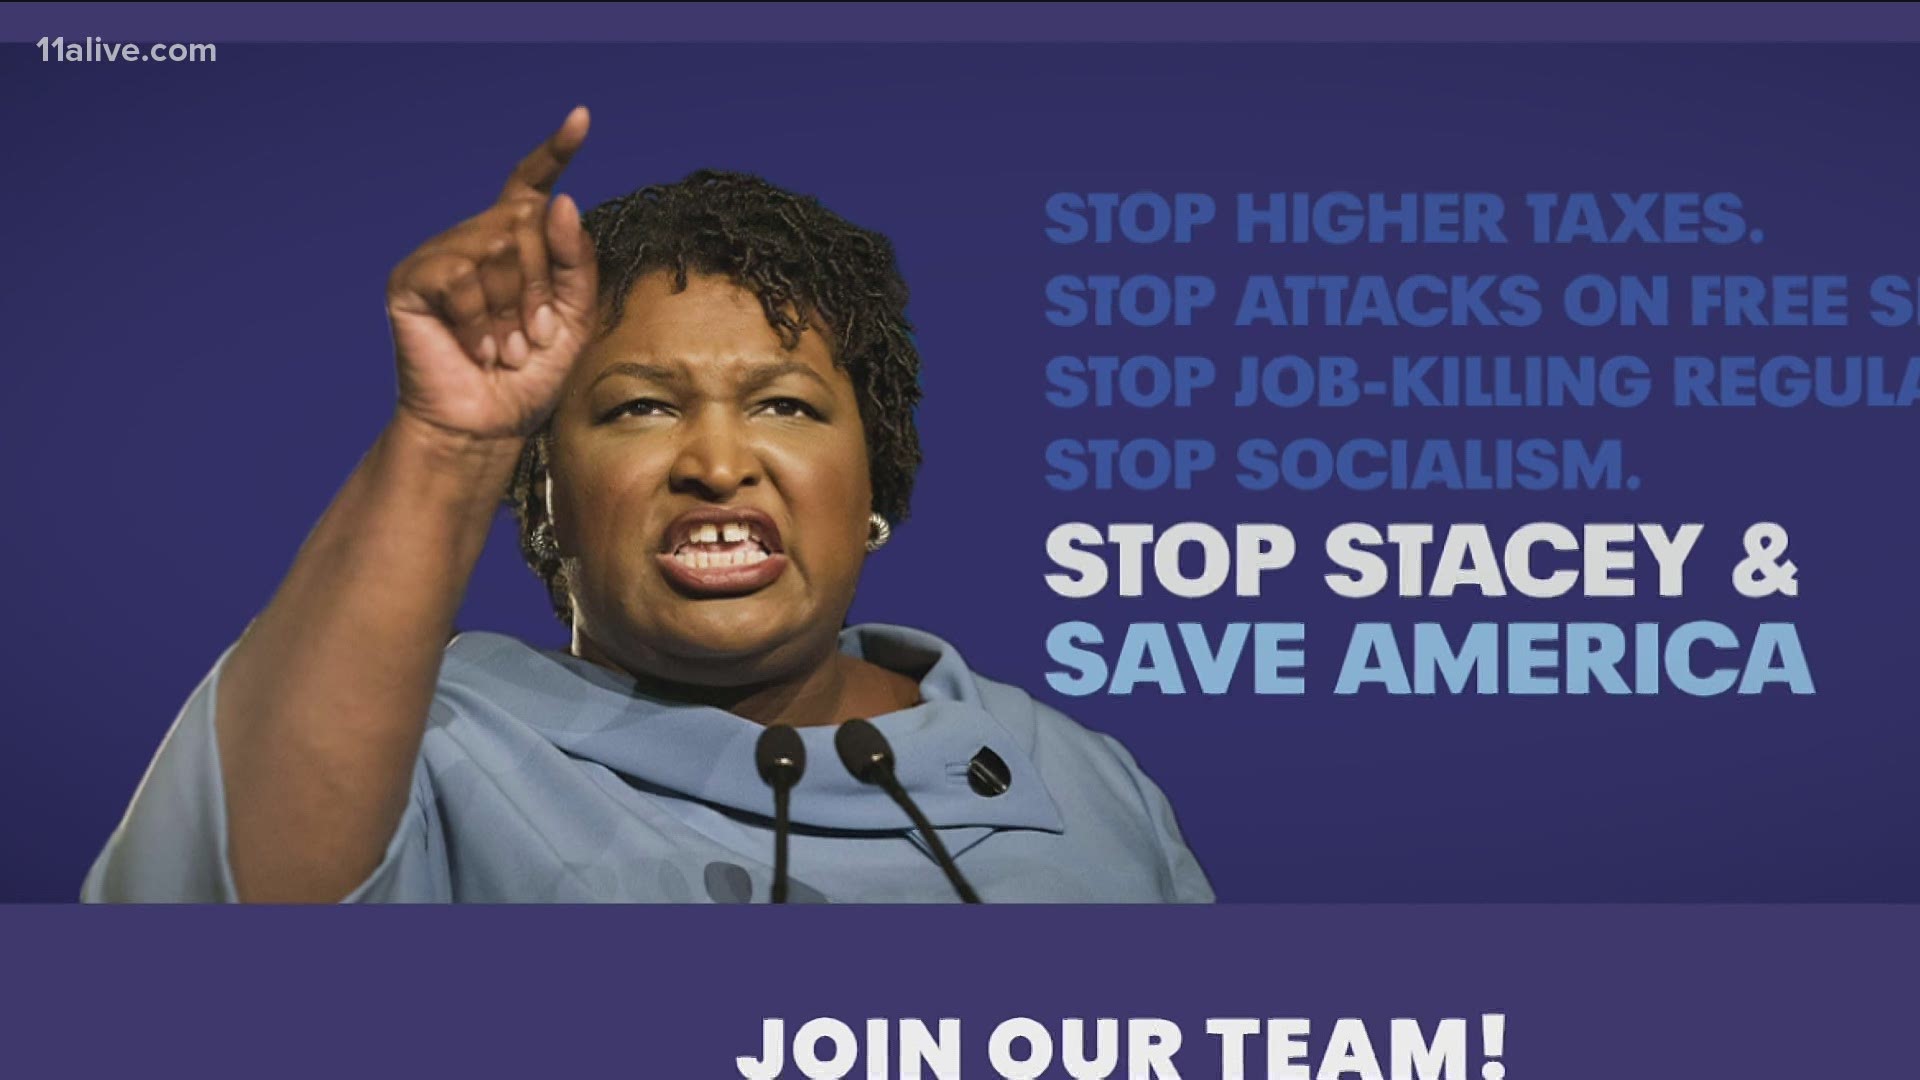 Democrat Stacey Abrams has made no announcement herself about the 2022 election. But Republicans clearly expect her to run for governor again next year.